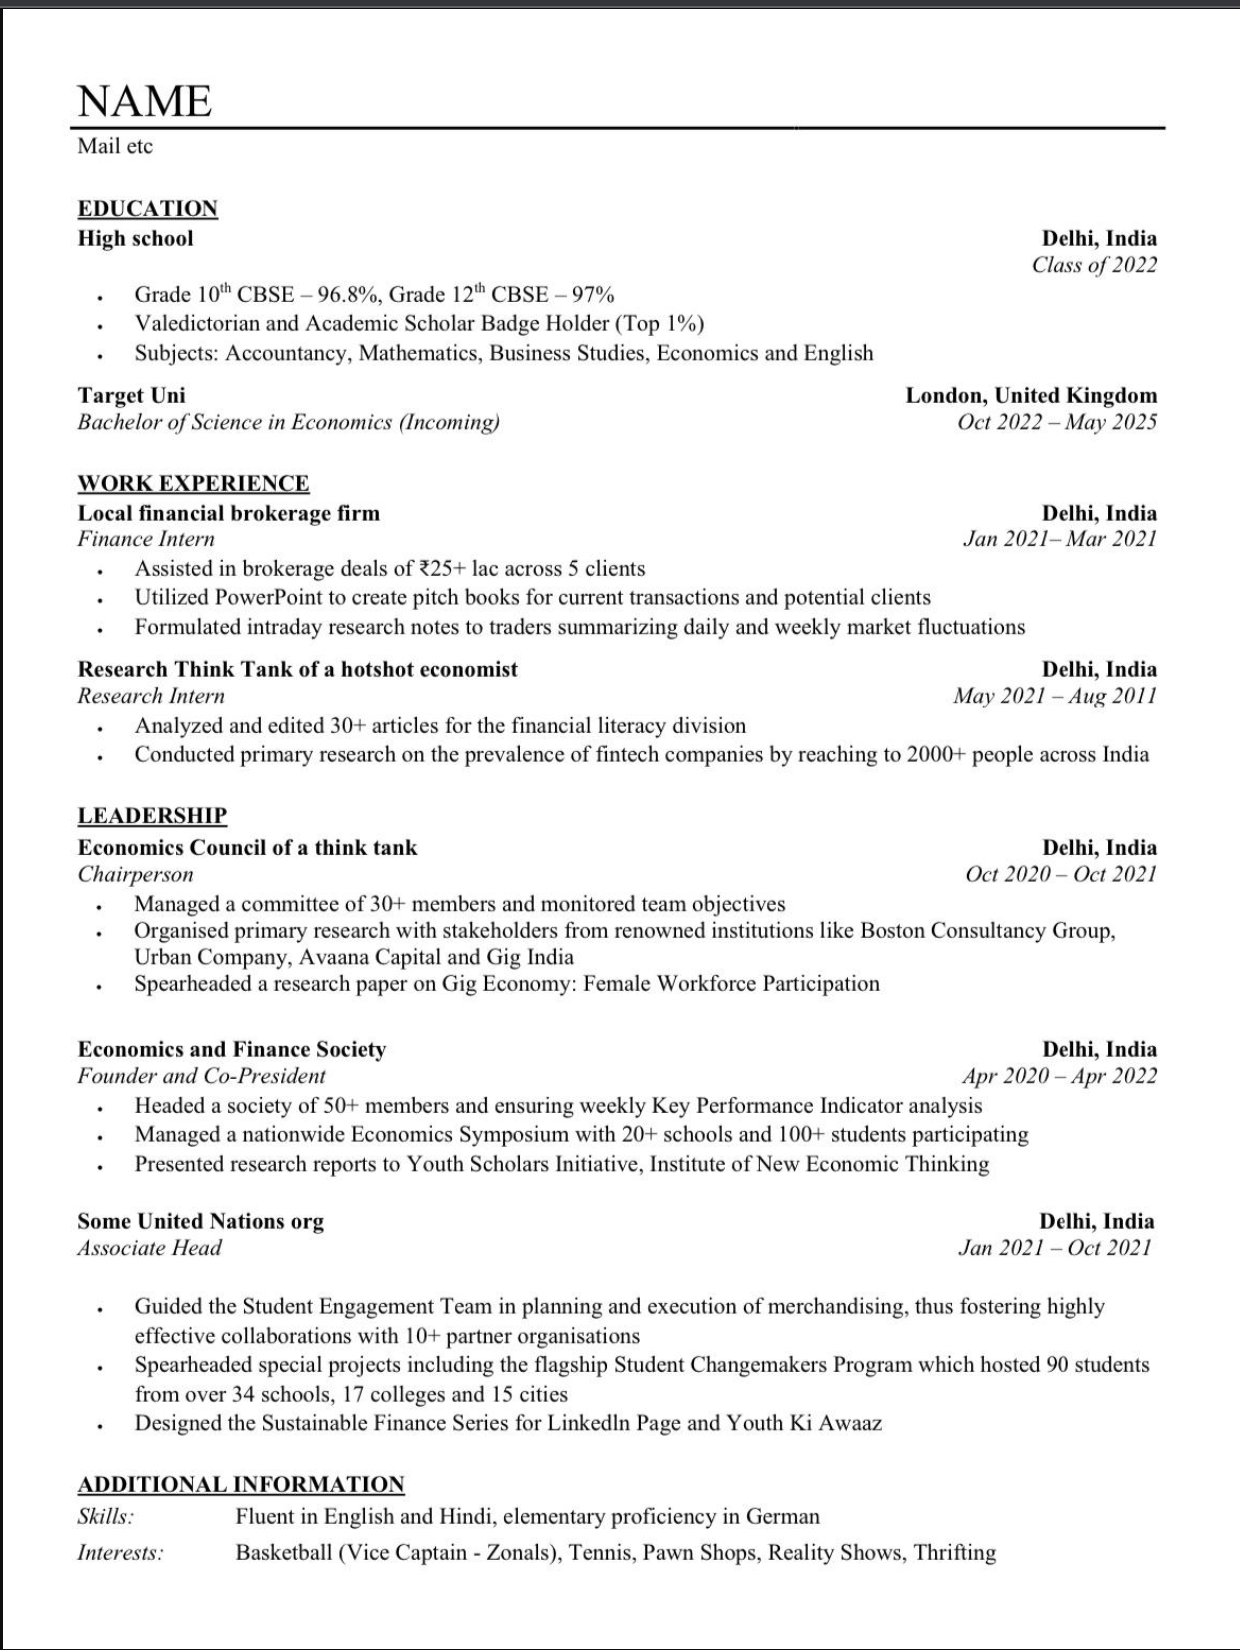 Hey, I've just finished high school and would joining a target uni in uk this october. Any advice on how to improve my cv, and prepare for spring week interviews would be apprecaited? I have heard that jobtestprep is great for tests so I'll take that 3 month subscription prolly.